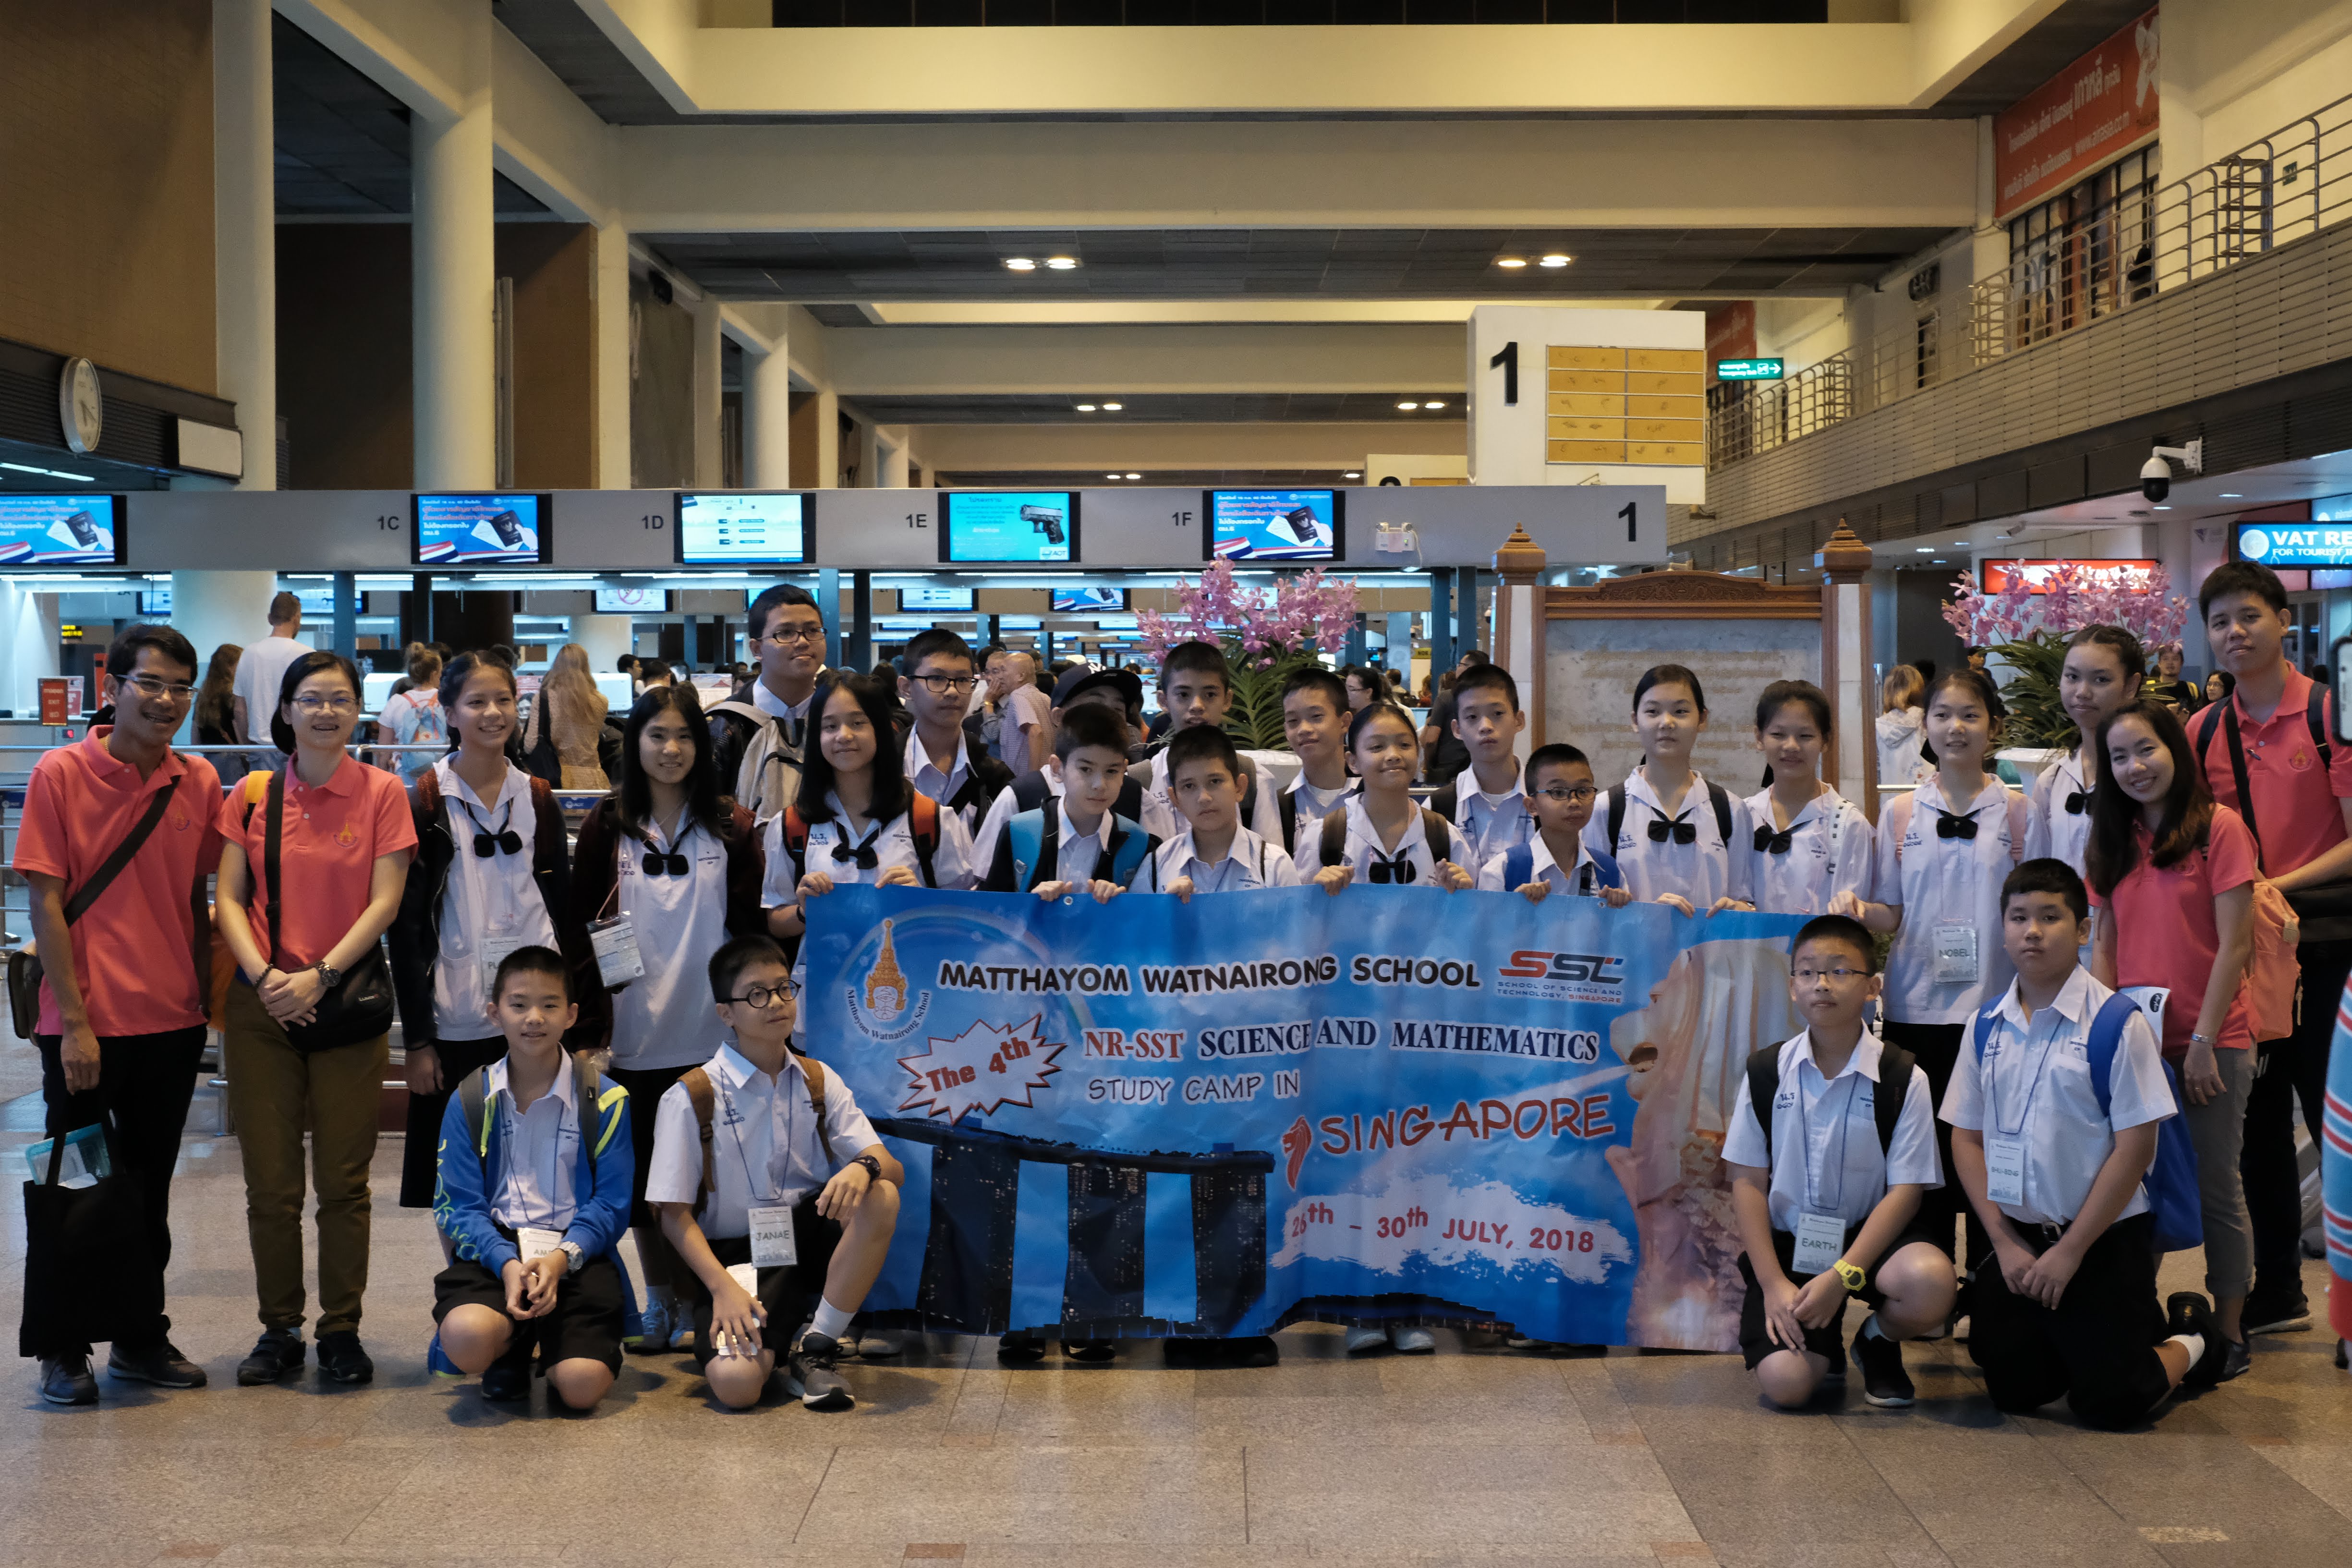 NR-SST SCIENCE AND MATHEMATICS STUDY CAMP IN SINGAPORE 2018